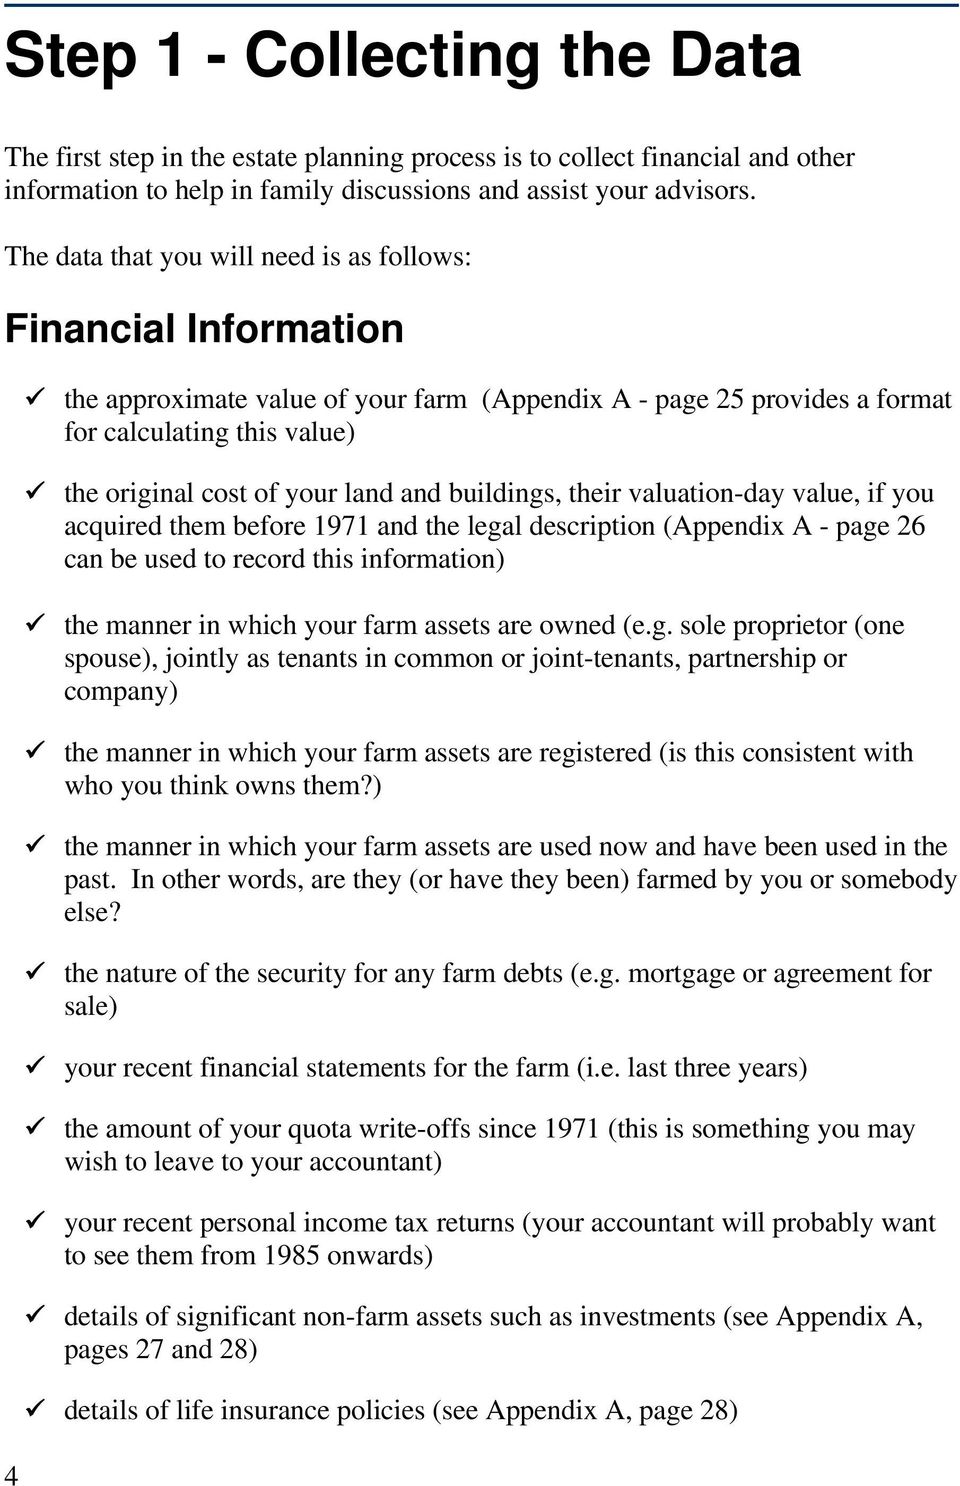 land and buildings, their valuation-day value, if you acquired them before 1971 and the legal description (Appendix A - page 26 can be used to record this information) the manner in which your farm